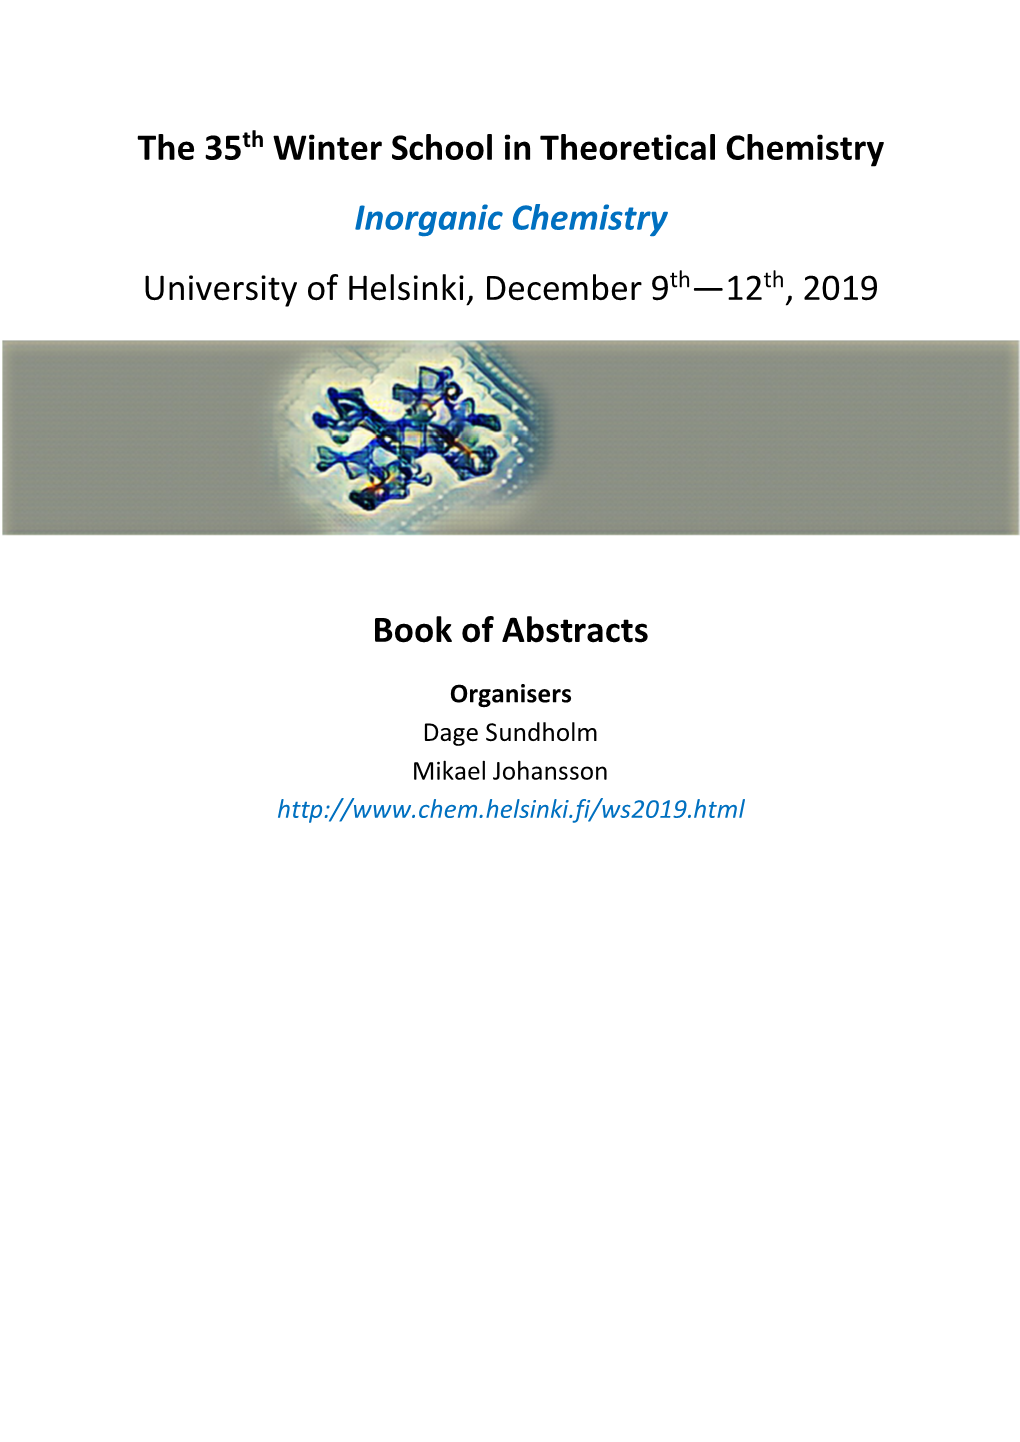 WS 2019 Book of Abstracts